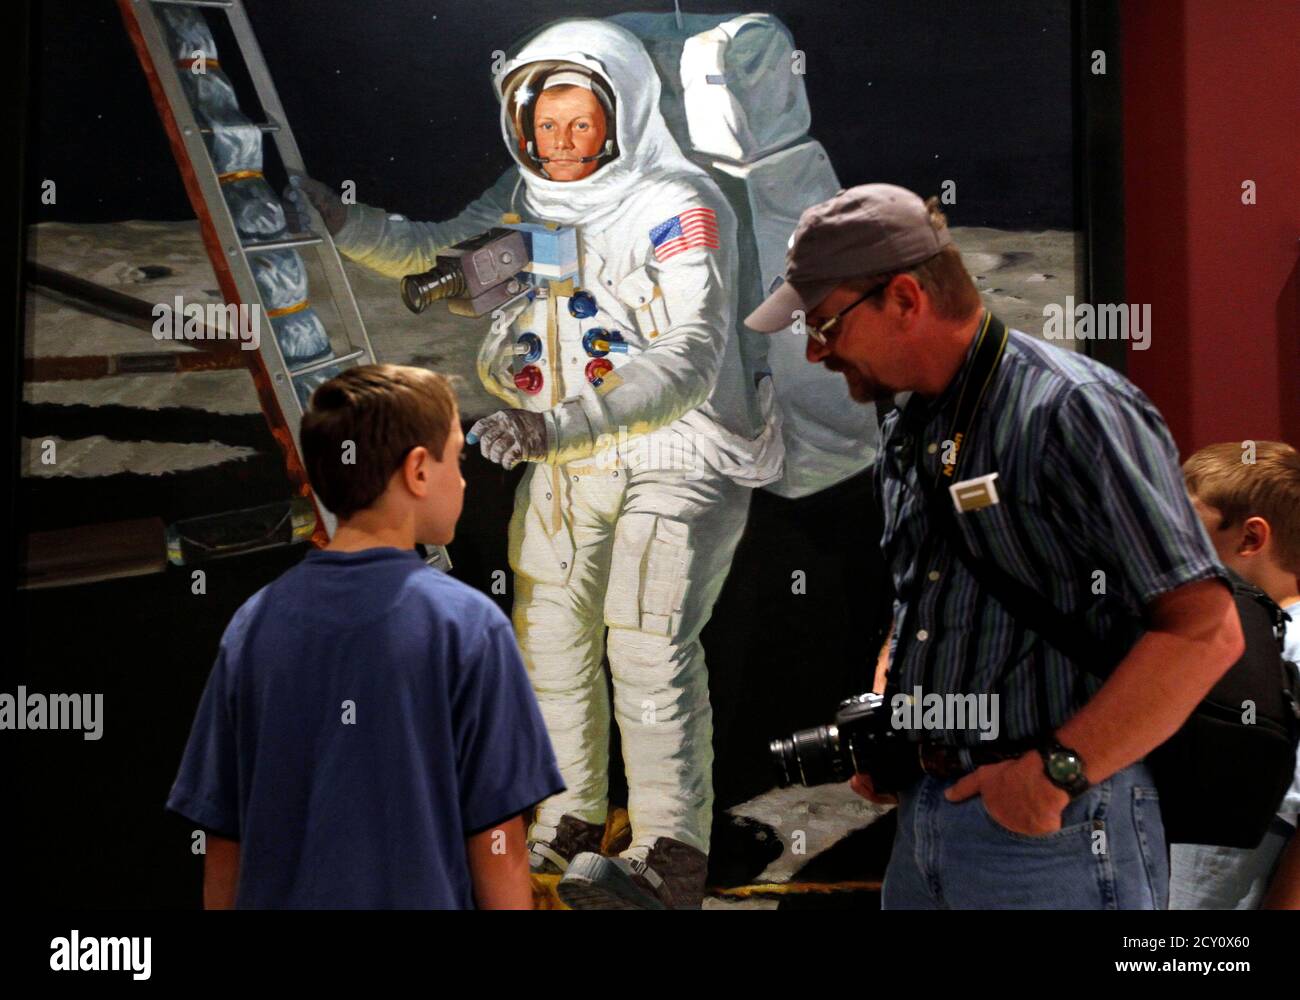 Kenny Wilson talks to his son Joshua (L) before a public memorial service for U.S. astronaut Neil Armstrong at the Armstrong Air and Space Museum in Wapakoneta, Ohio August 29, 2012.  Armstrong, who took a giant leap for mankind when he became the first person to walk on the moon, has died at the age of 82, his family said on Saturday.  REUTERS/Matt Sullivan  (UNITED STATES - Tags: SCIENCE TECHNOLOGY OBITUARY) Stock Photo